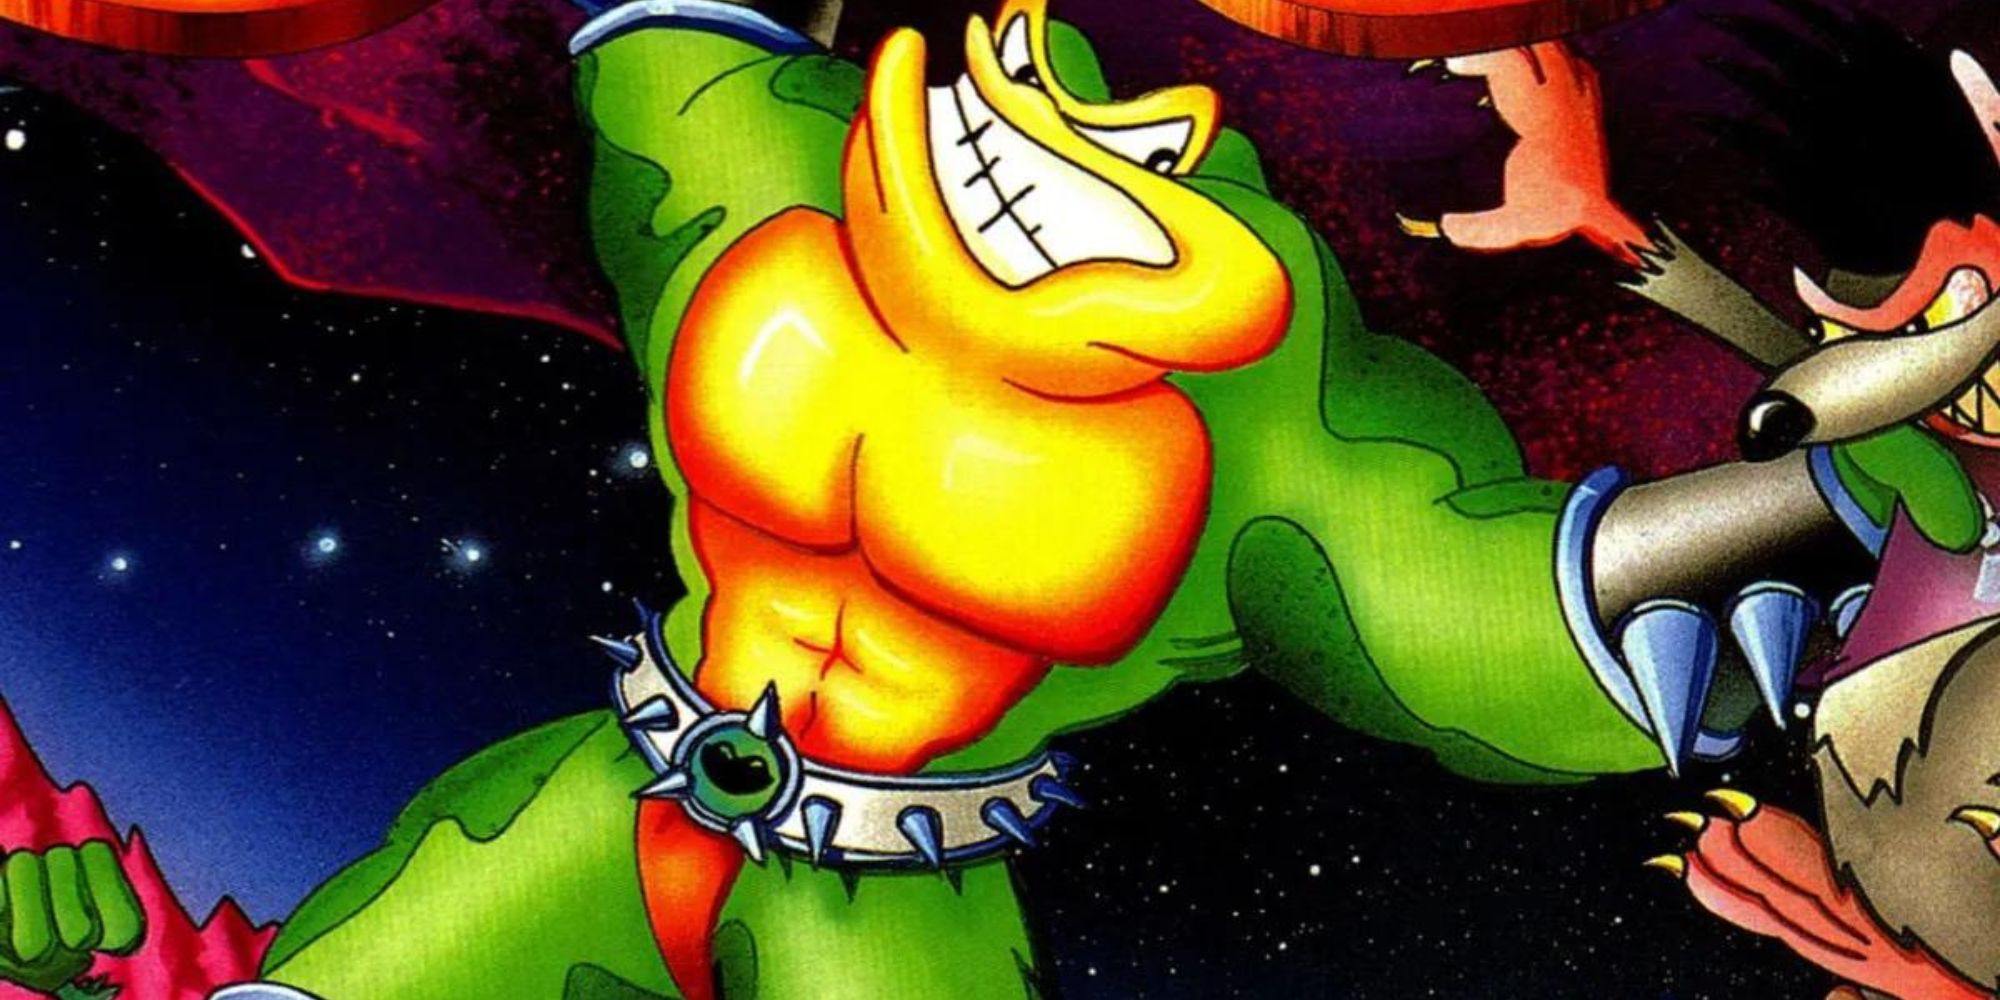 A Battletoad holds a Scuzz in one hand in space